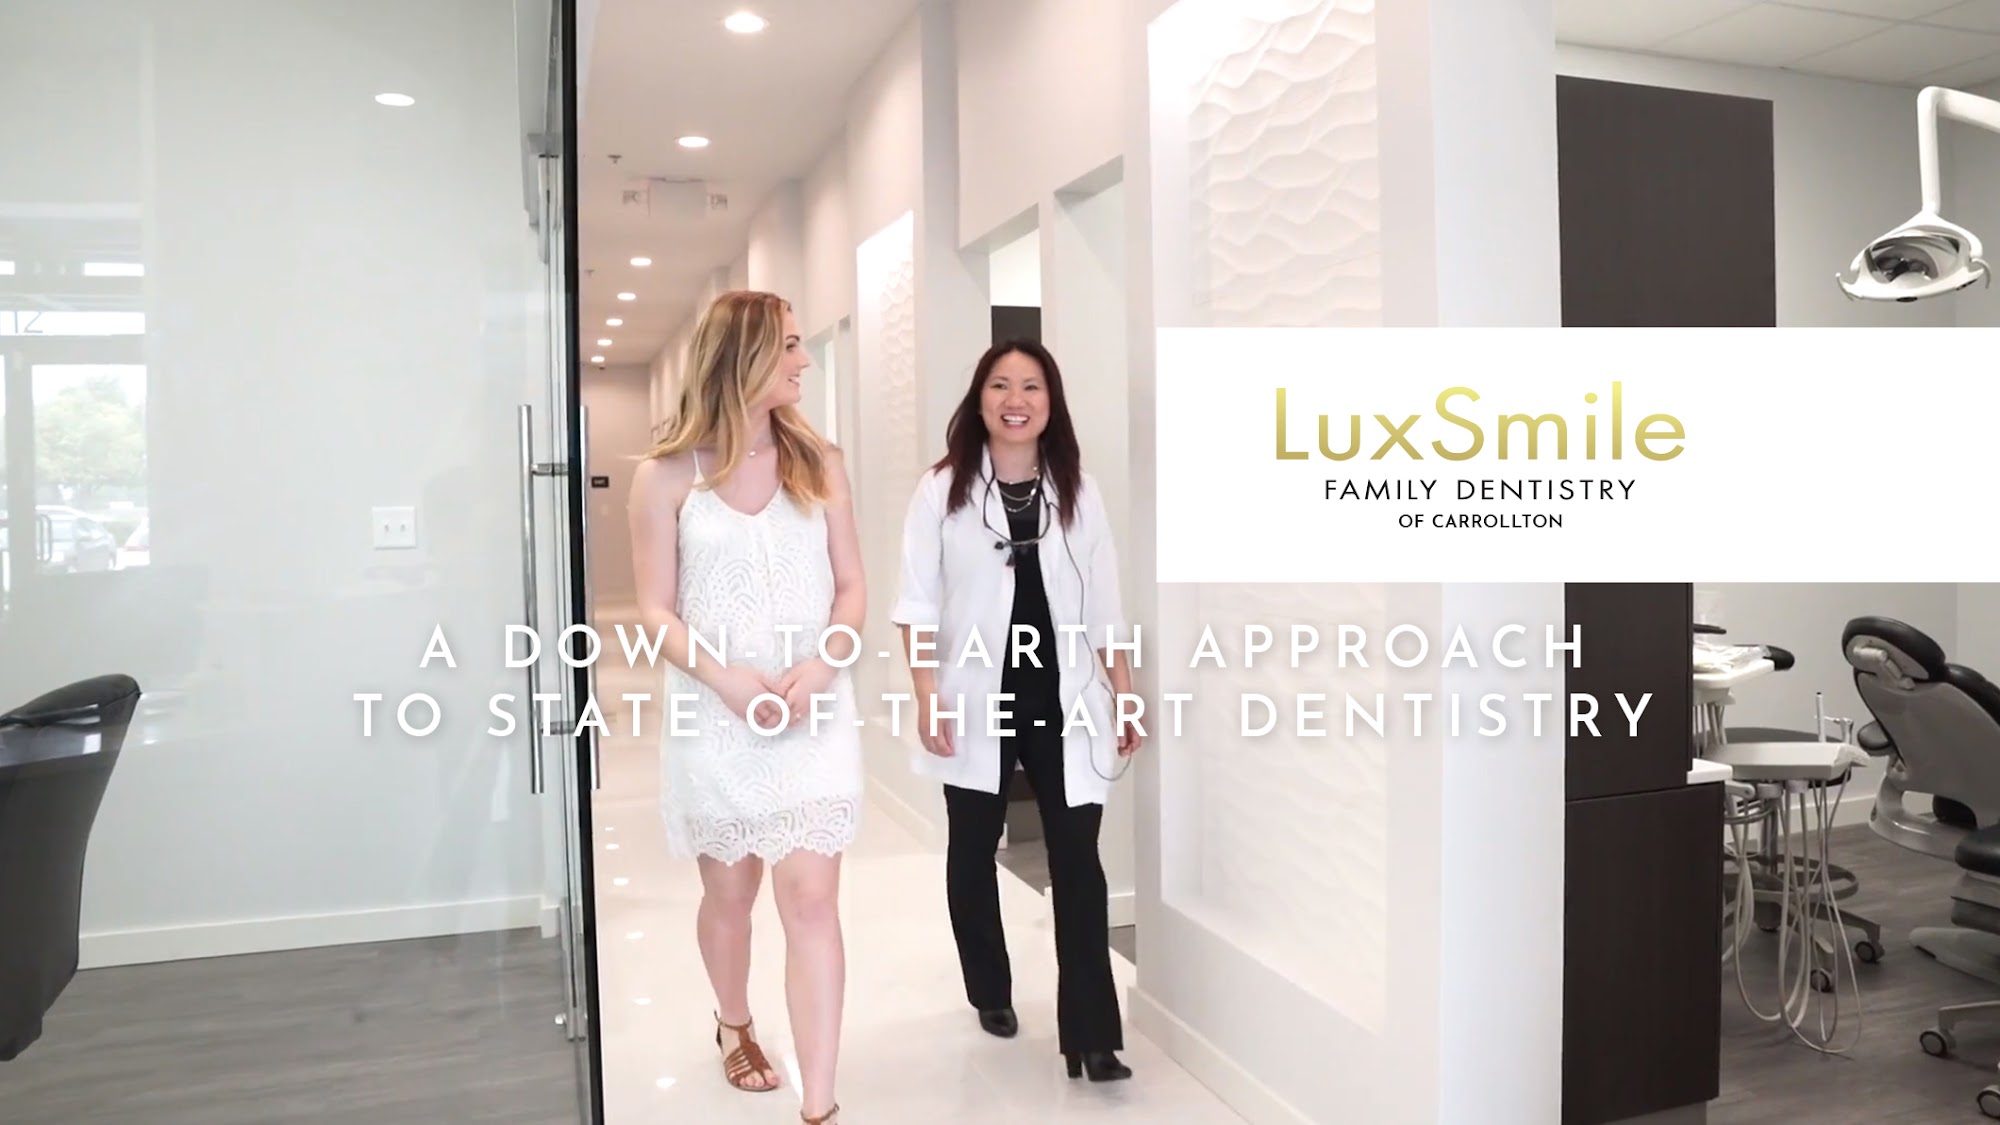 LuxSmile Family Dentistry of Carrollton